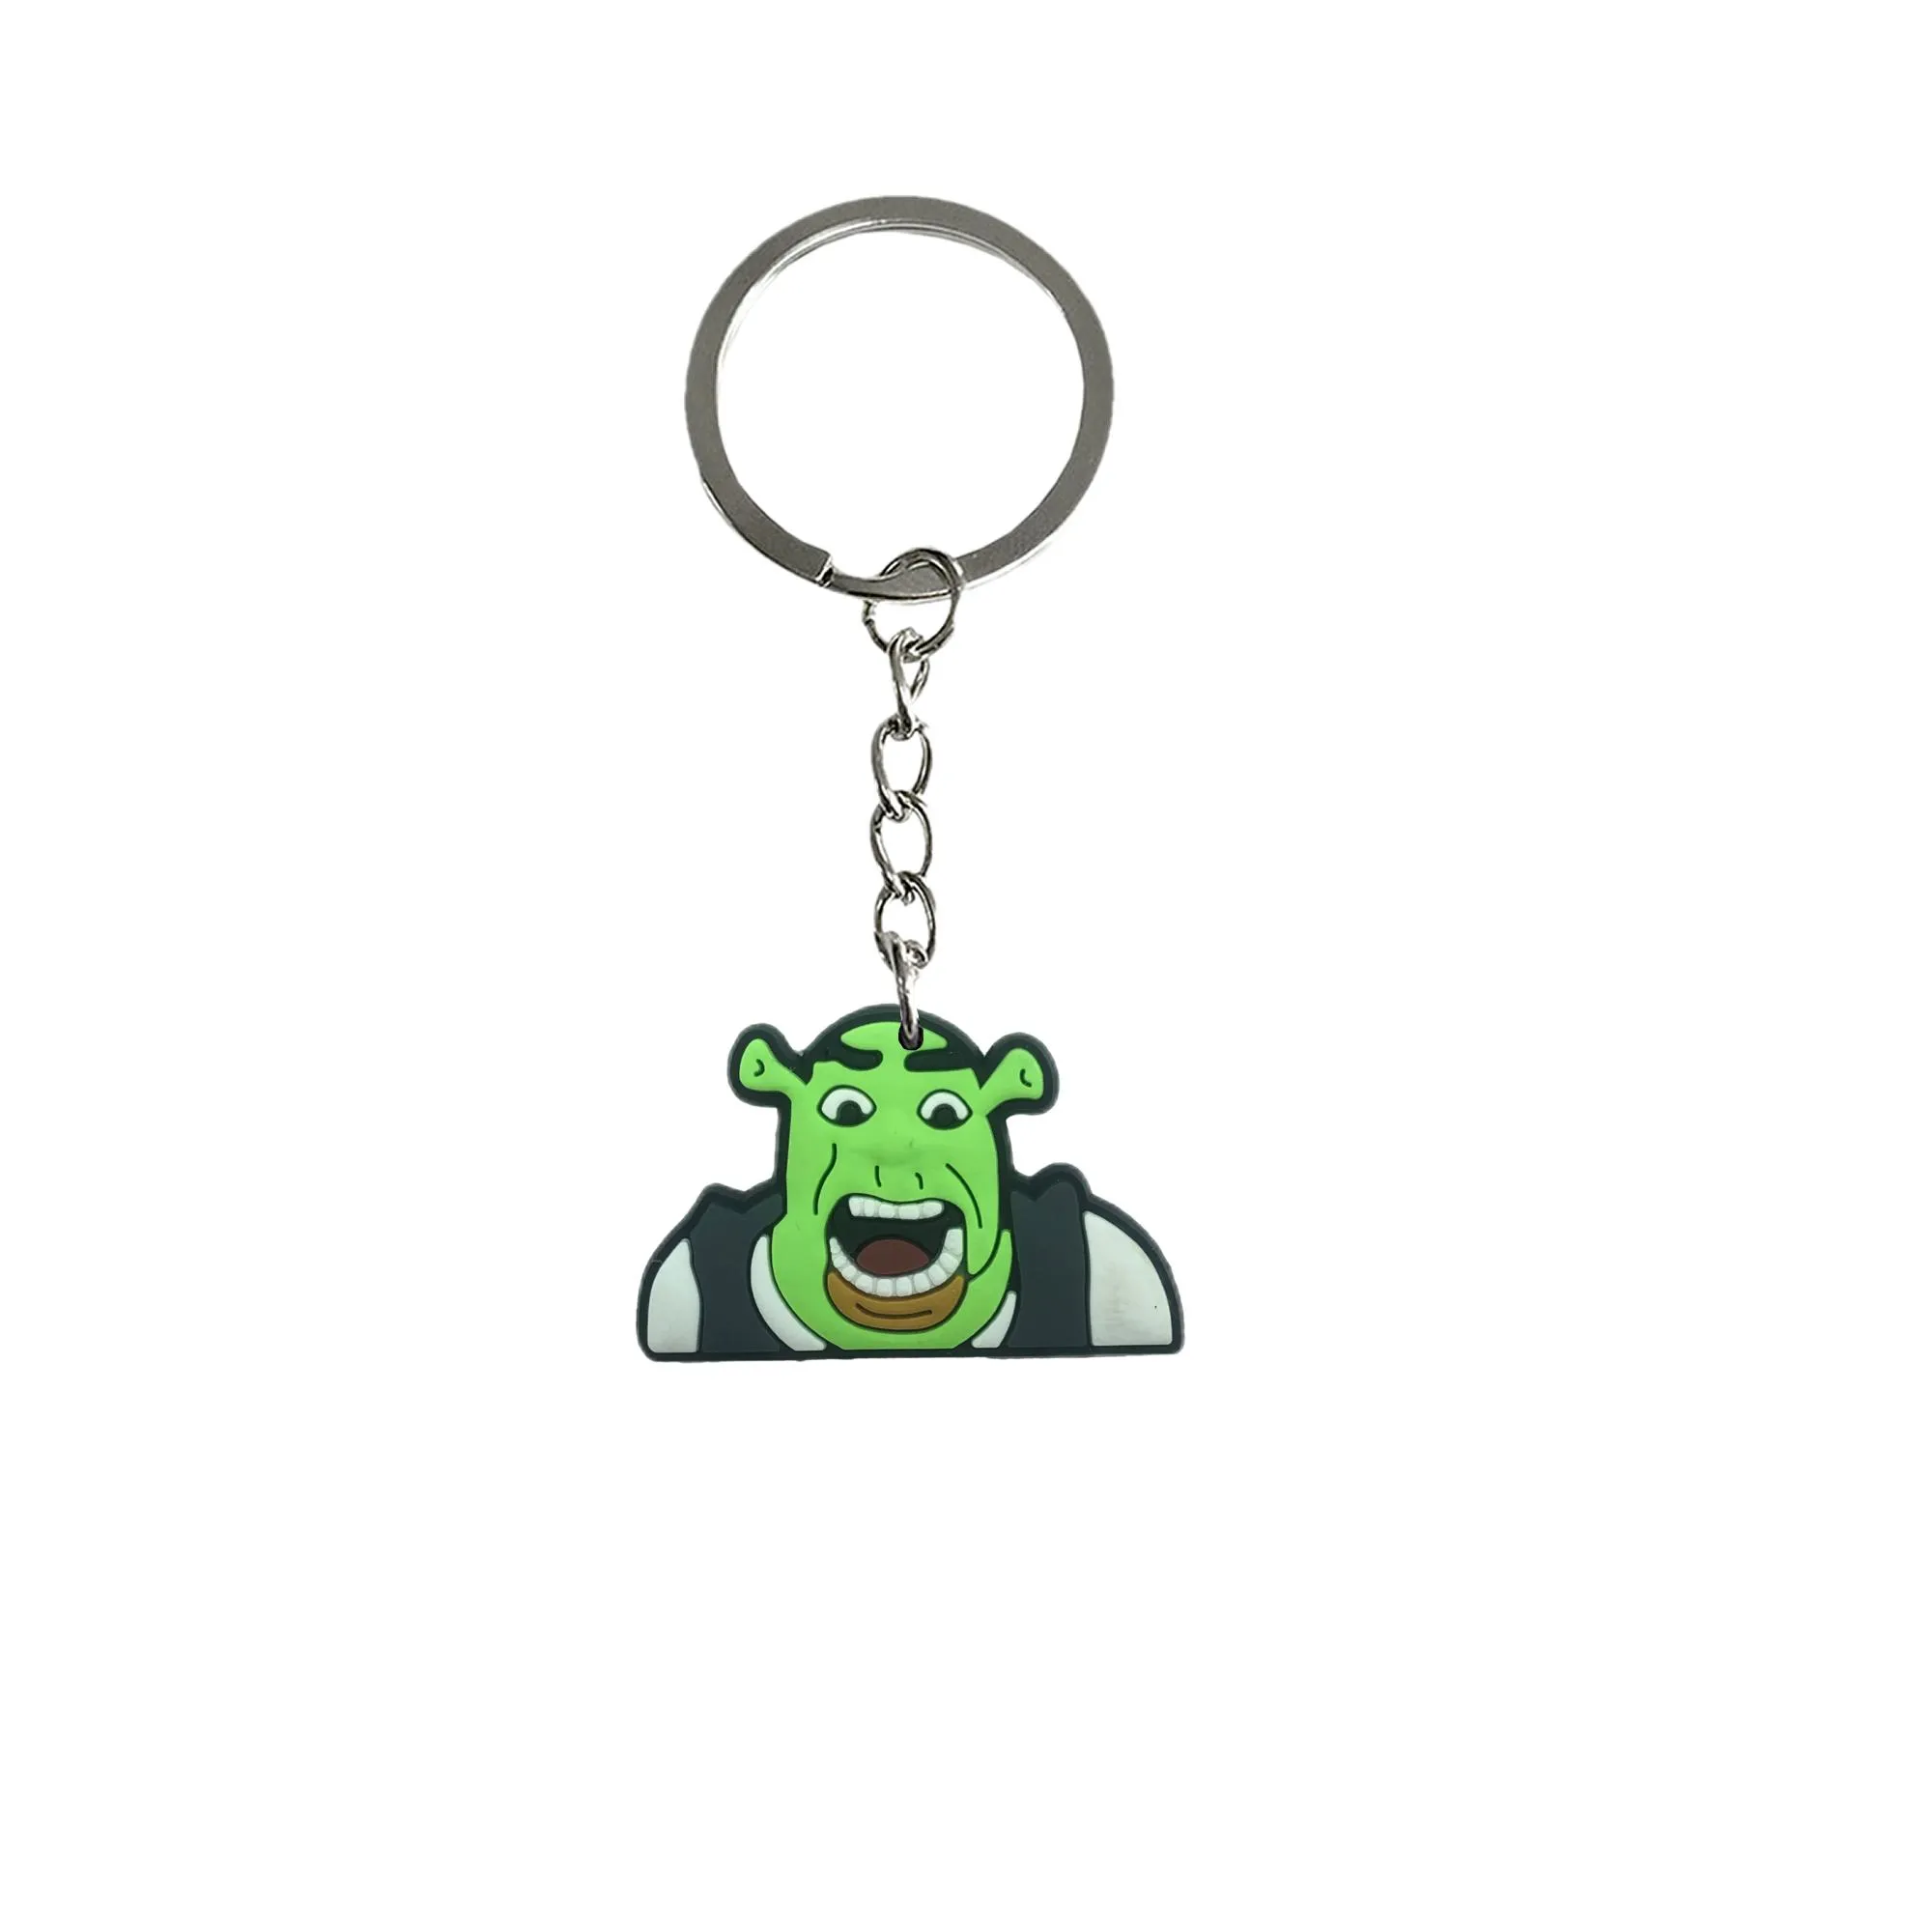 shrek keychain key chain for girls accessories backpack handbag and car gift valentines day ring christmas fans keyring suitable schoolbag classroom school birthday party supplies couple chains women men